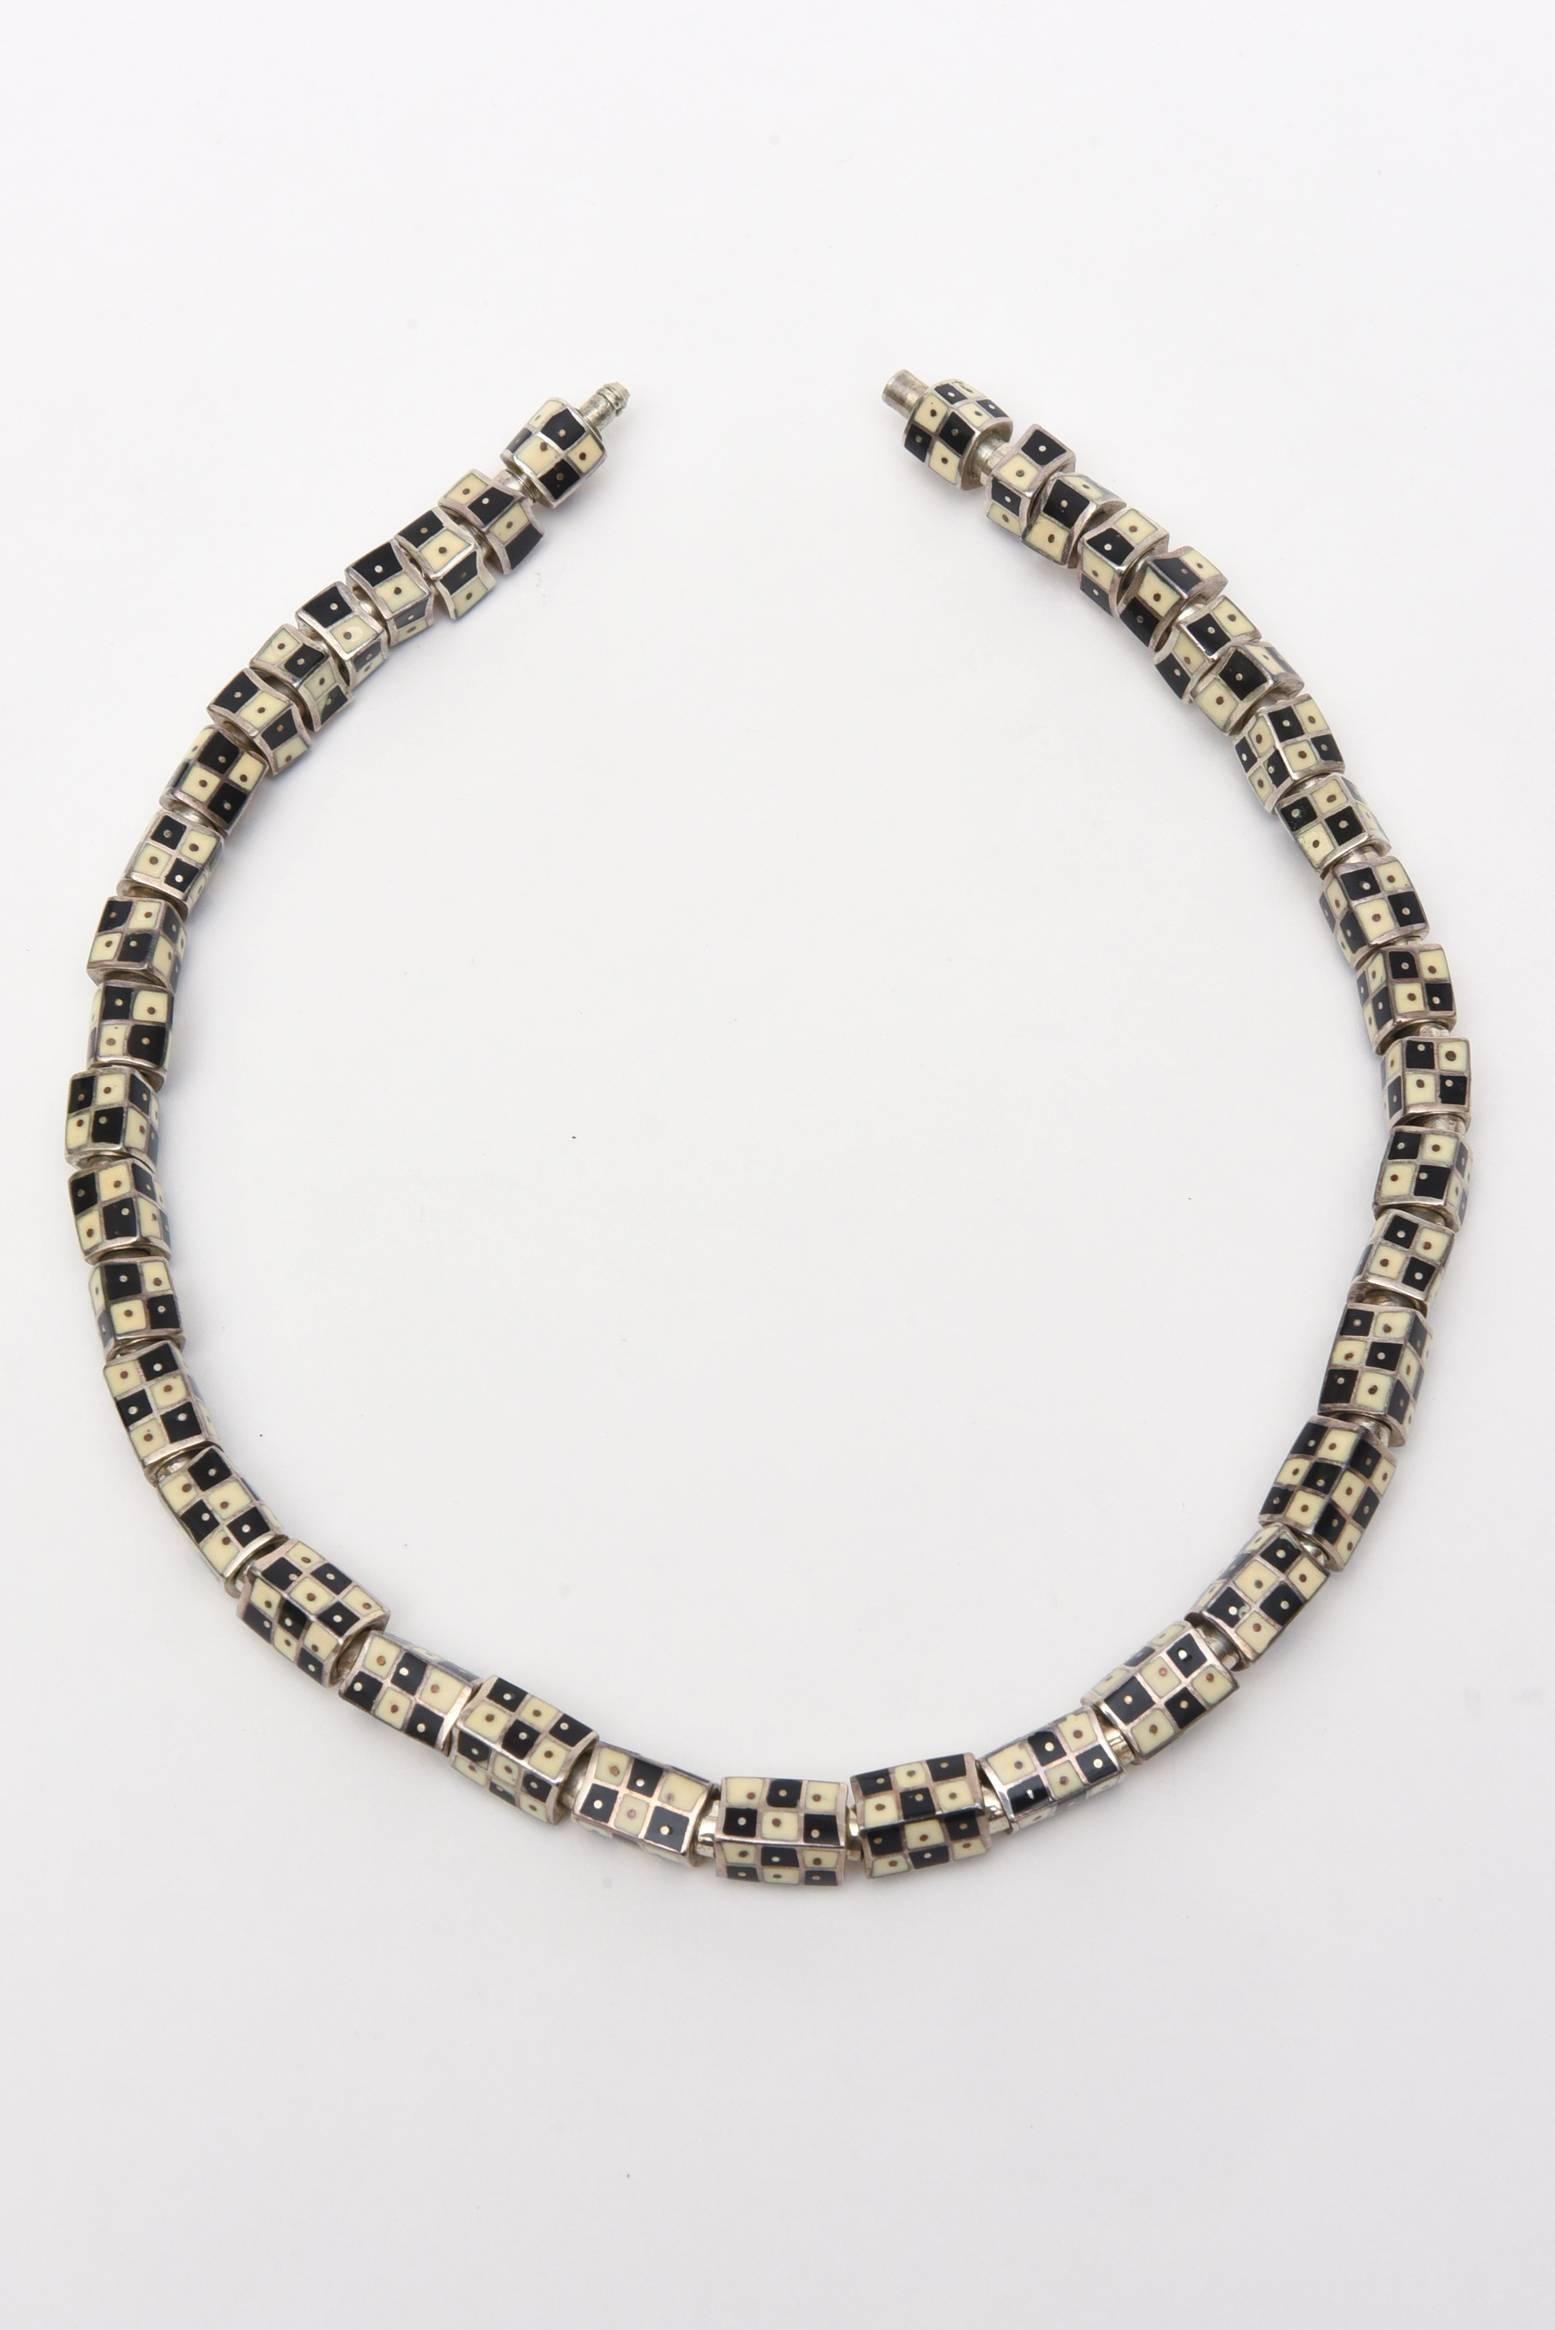 This gorgeous strand of black and off white enamel set against sterling silver vintage neck collar necklace is so sculptural with it's graphic designs of the art deco era. It is now timeless, classic and fabulous. Each enamel link has movement on